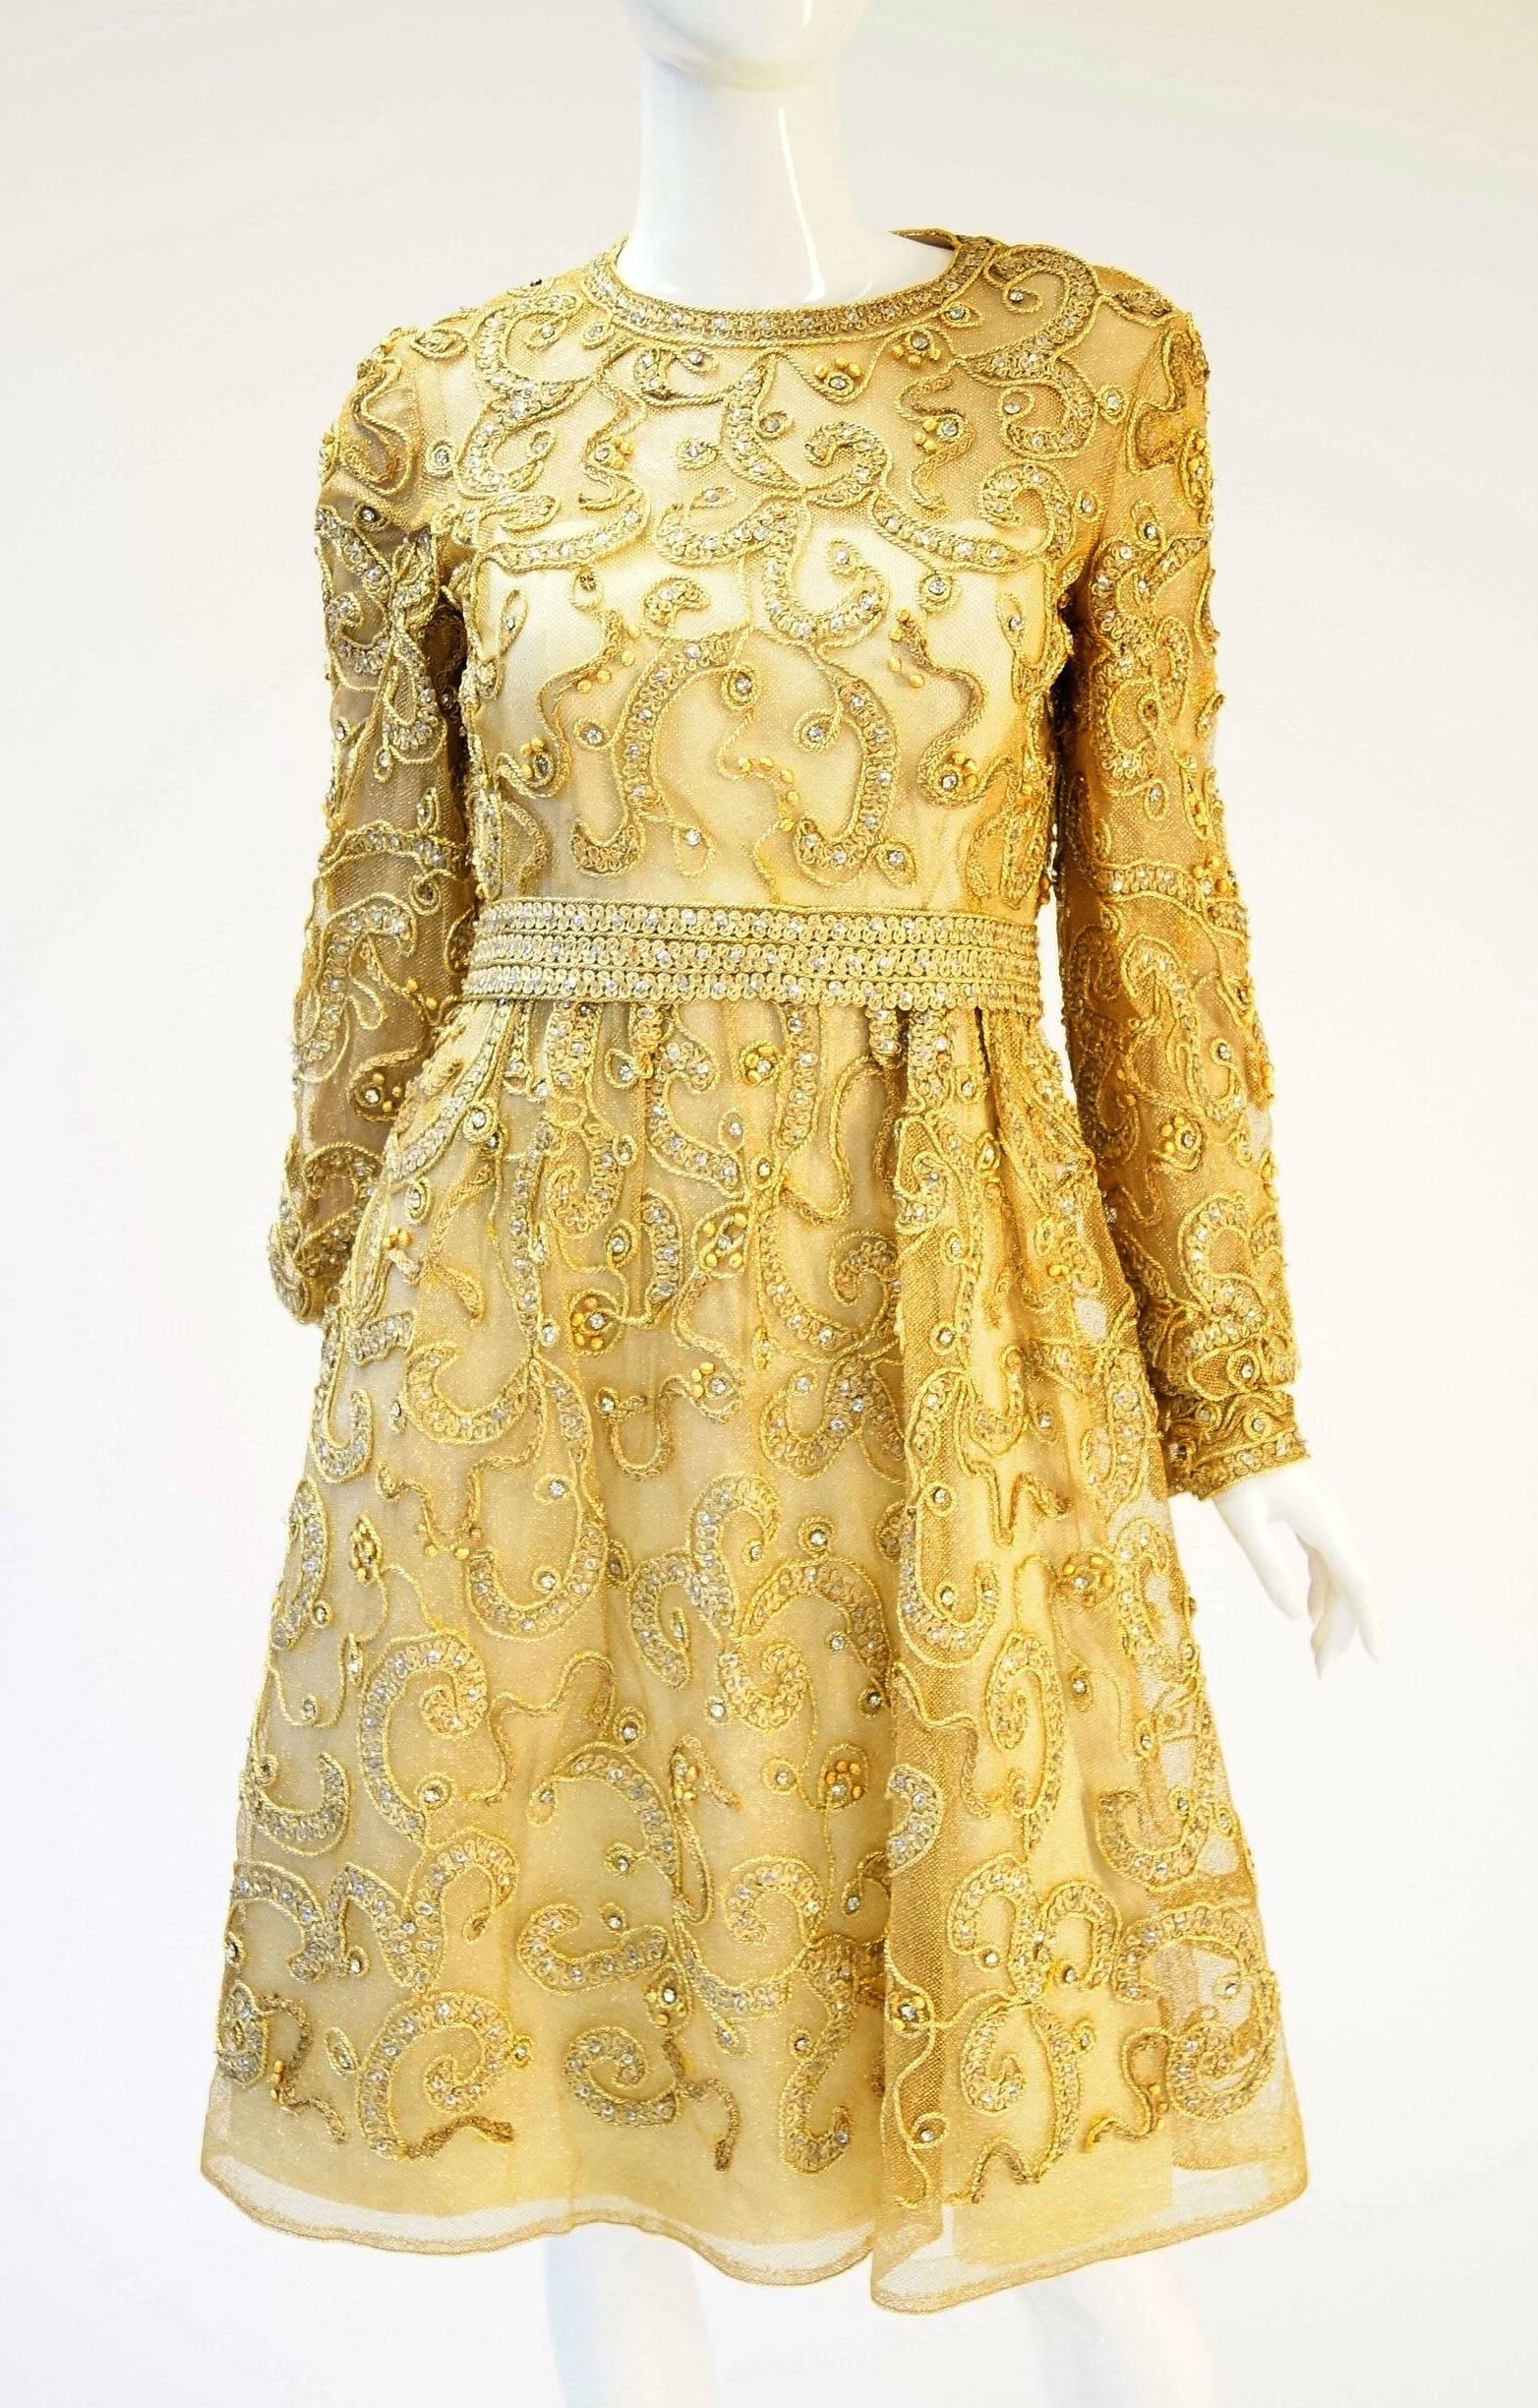 Gorgeous 1960s dress by Malcolm Starr. This gorgeous cocktail dress is knee length, with long, cuffed sleeves, and jewel neckline. The dress features a delicate abstract floral design in gold embroidered passementerie, with rhinestone, sequin, and